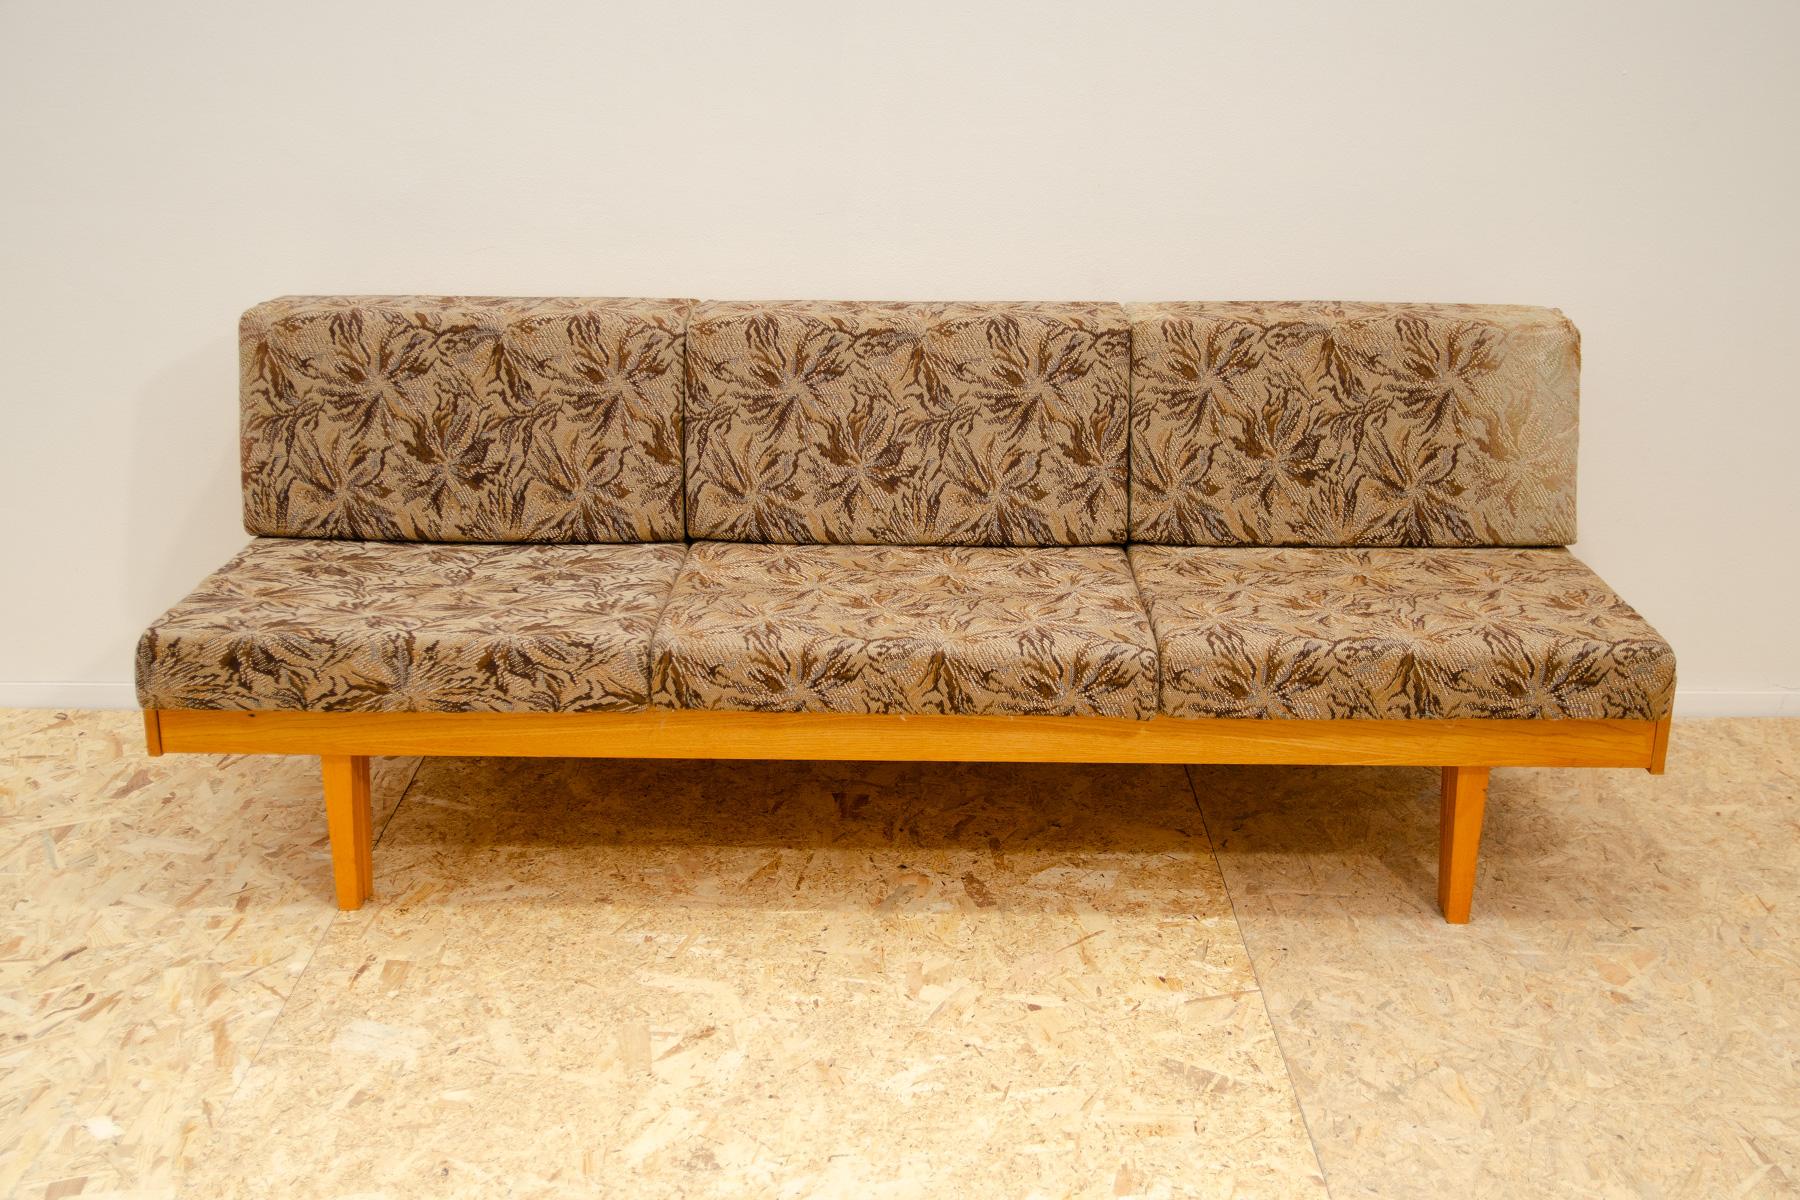 Mid century sofabed in Hans Wegner style, made in the former Czechoslovakia in the 1960´s. Material: beech wood, fabric. The sofa is structuraly in very good condition, the fabric is completely faded from the sun in several places. It would be